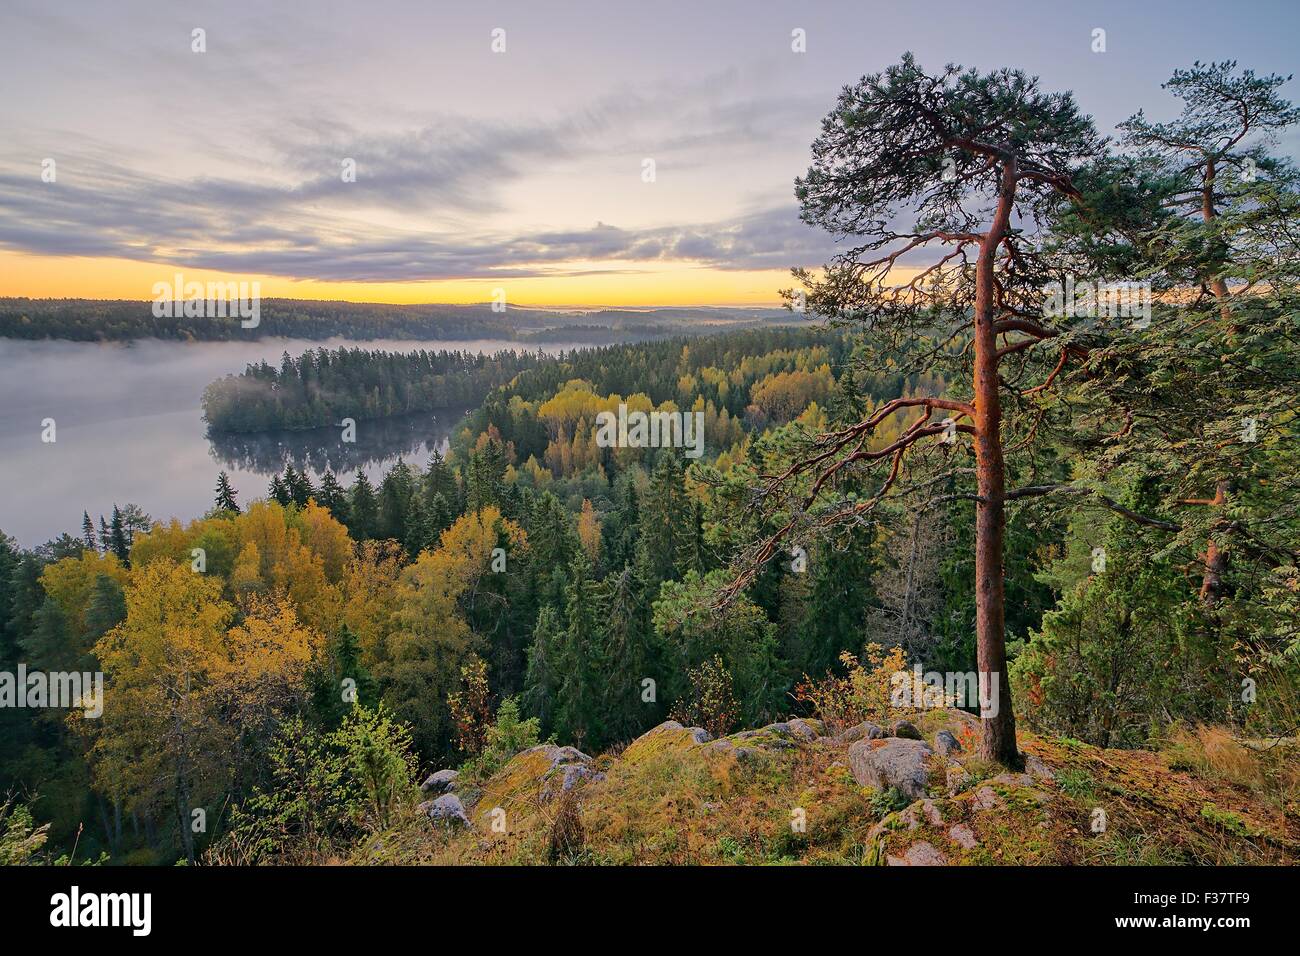 Foggy morning in the Aulanko nature reserve park in Finland. The sun is about to rise in the early morning. HDR image. Stock Photo